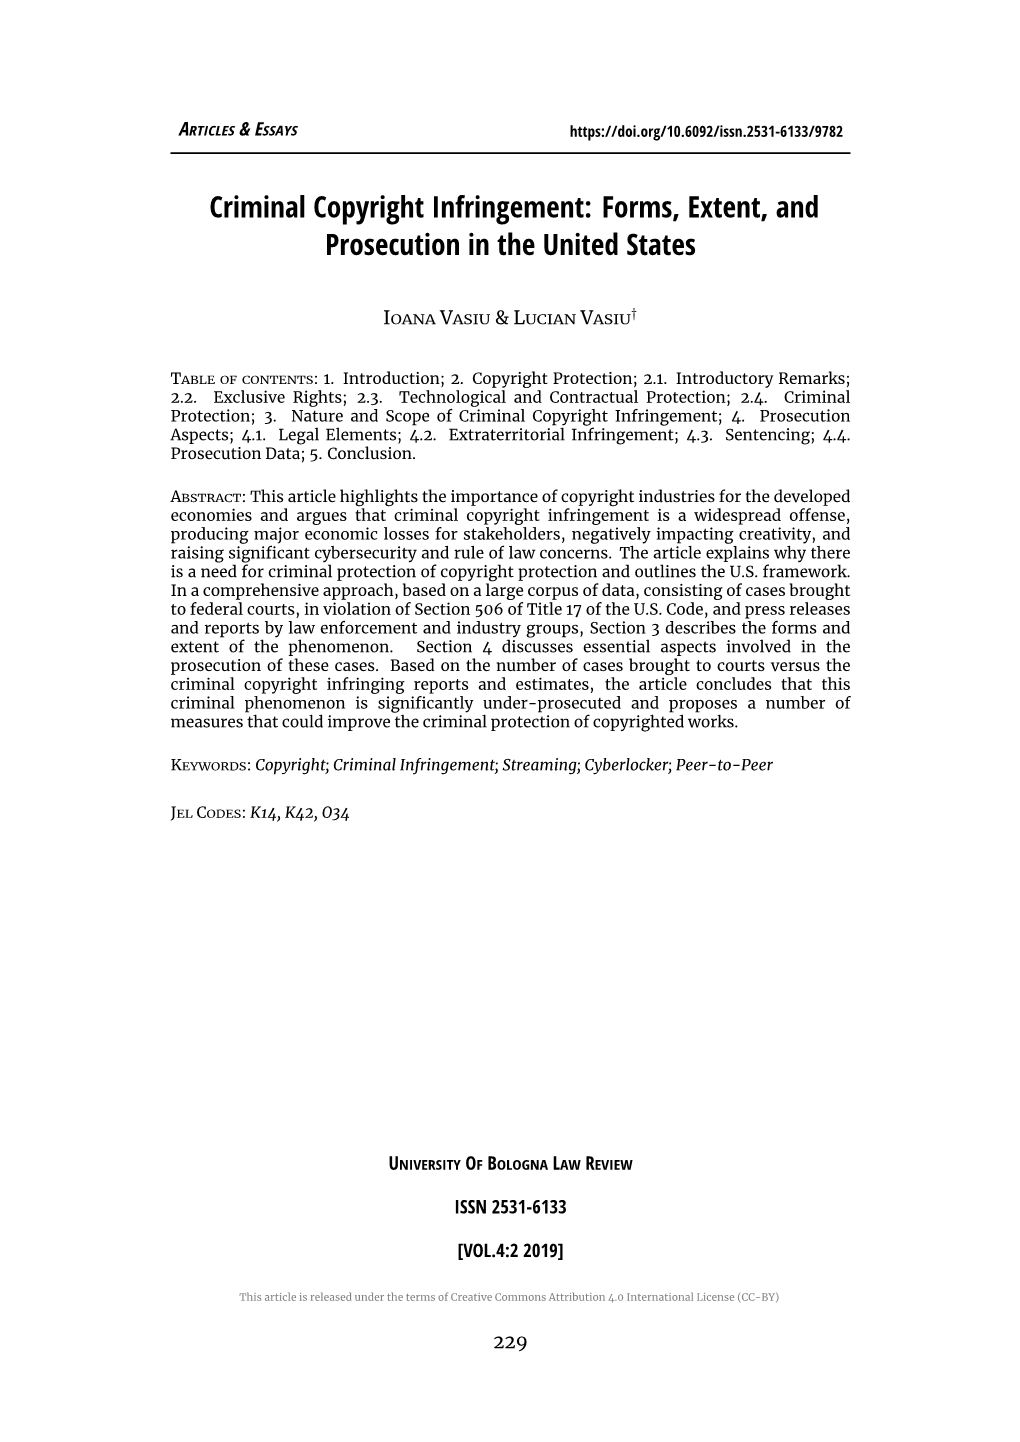 Criminal Copyright Infringement: Forms, Extent, and Prosecution in the United States